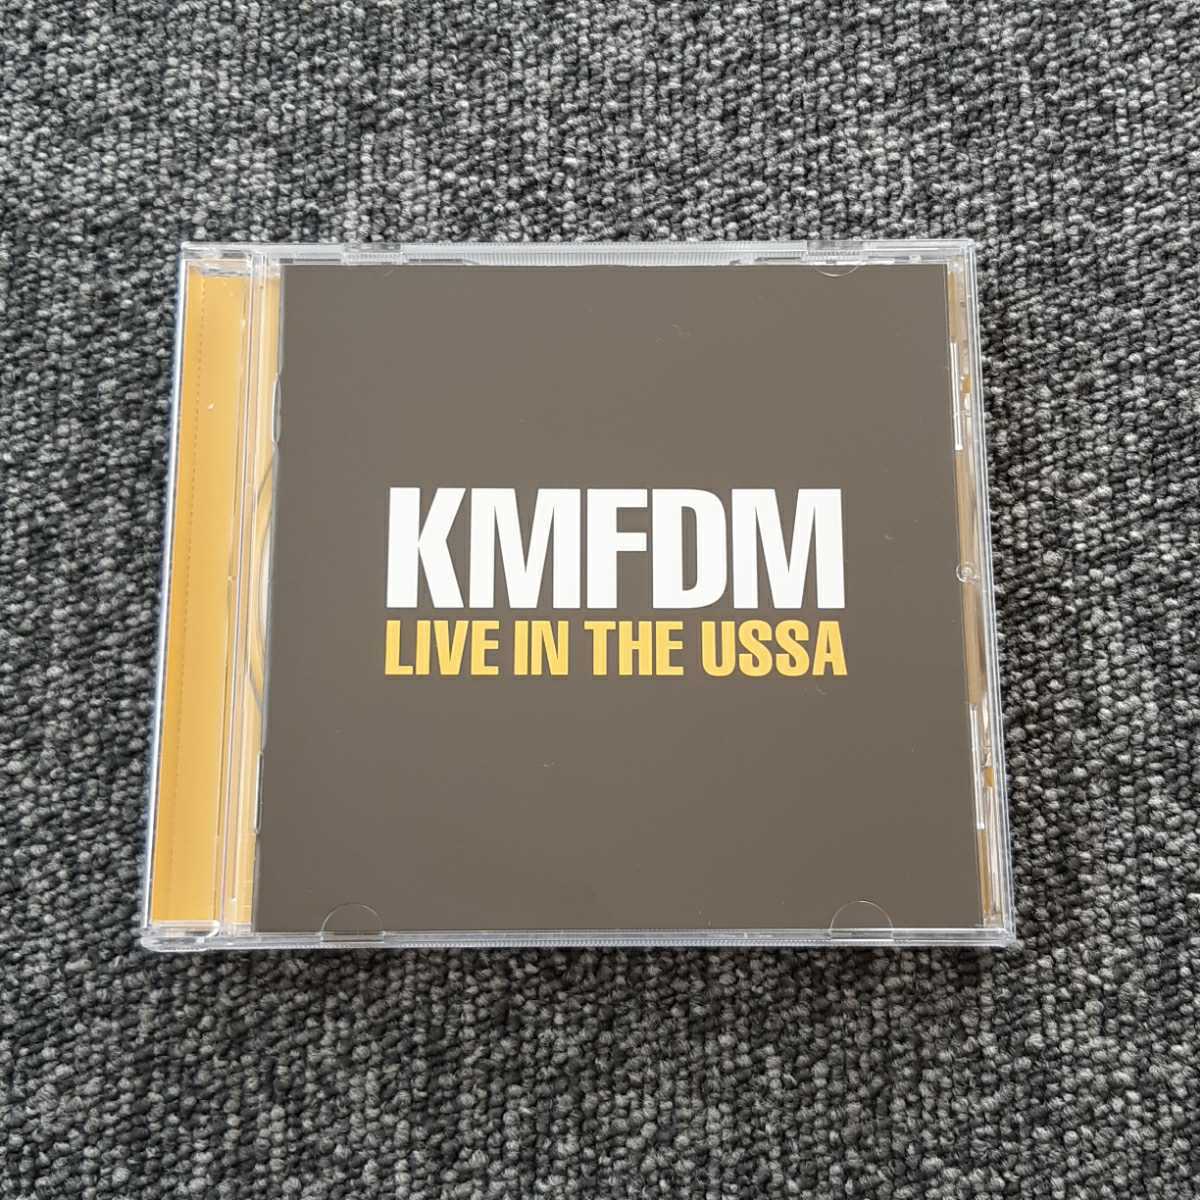 KMFDM LIVE IN THE USSA 輸入盤_画像1